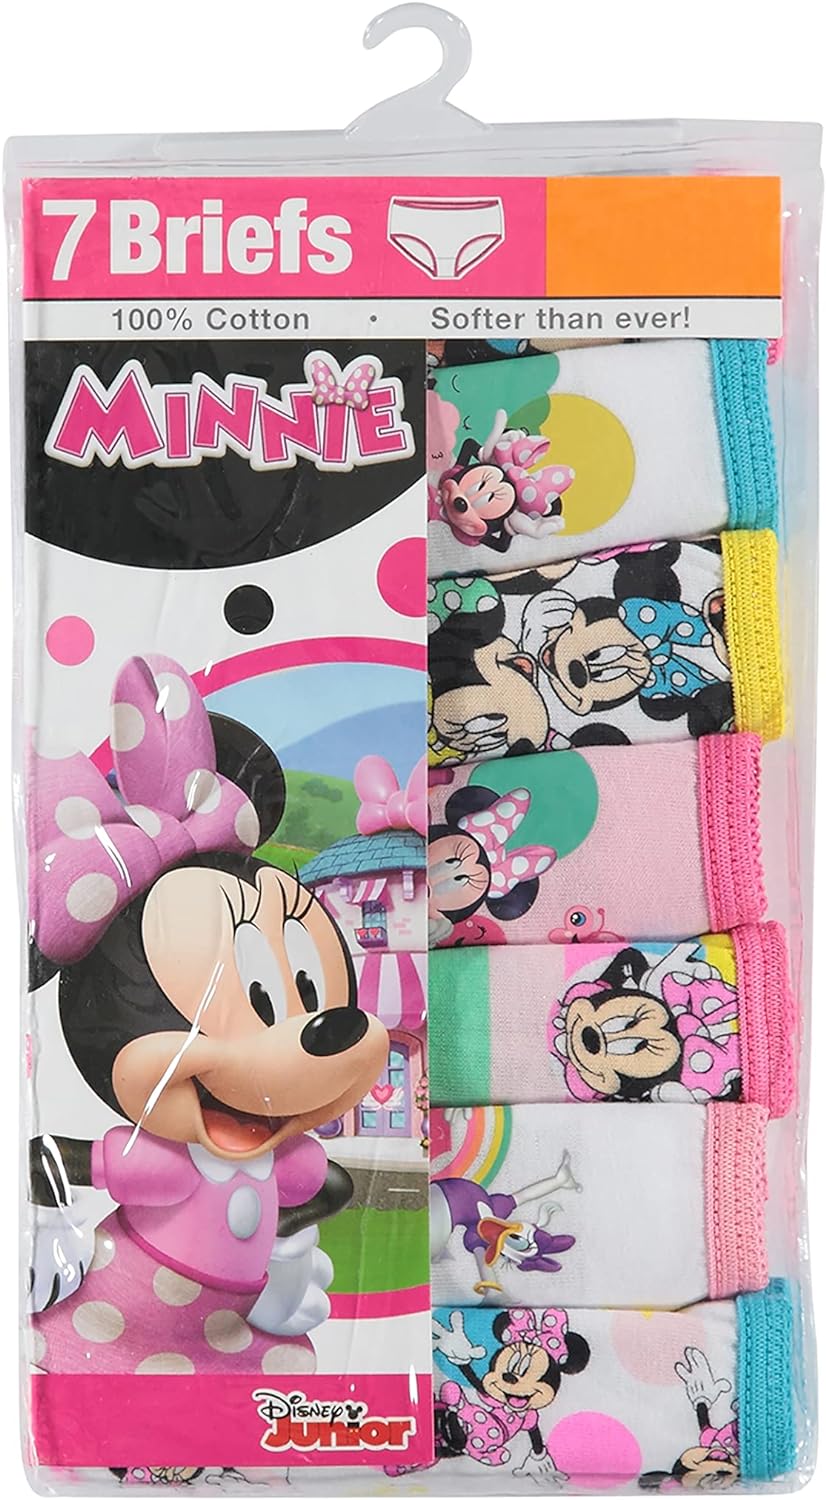 Disney Girls' Minnie Mouse Underwear Multipacks with Assorted Prints in Sizes 2/3t, 4t, 4, 6, 8 and 10